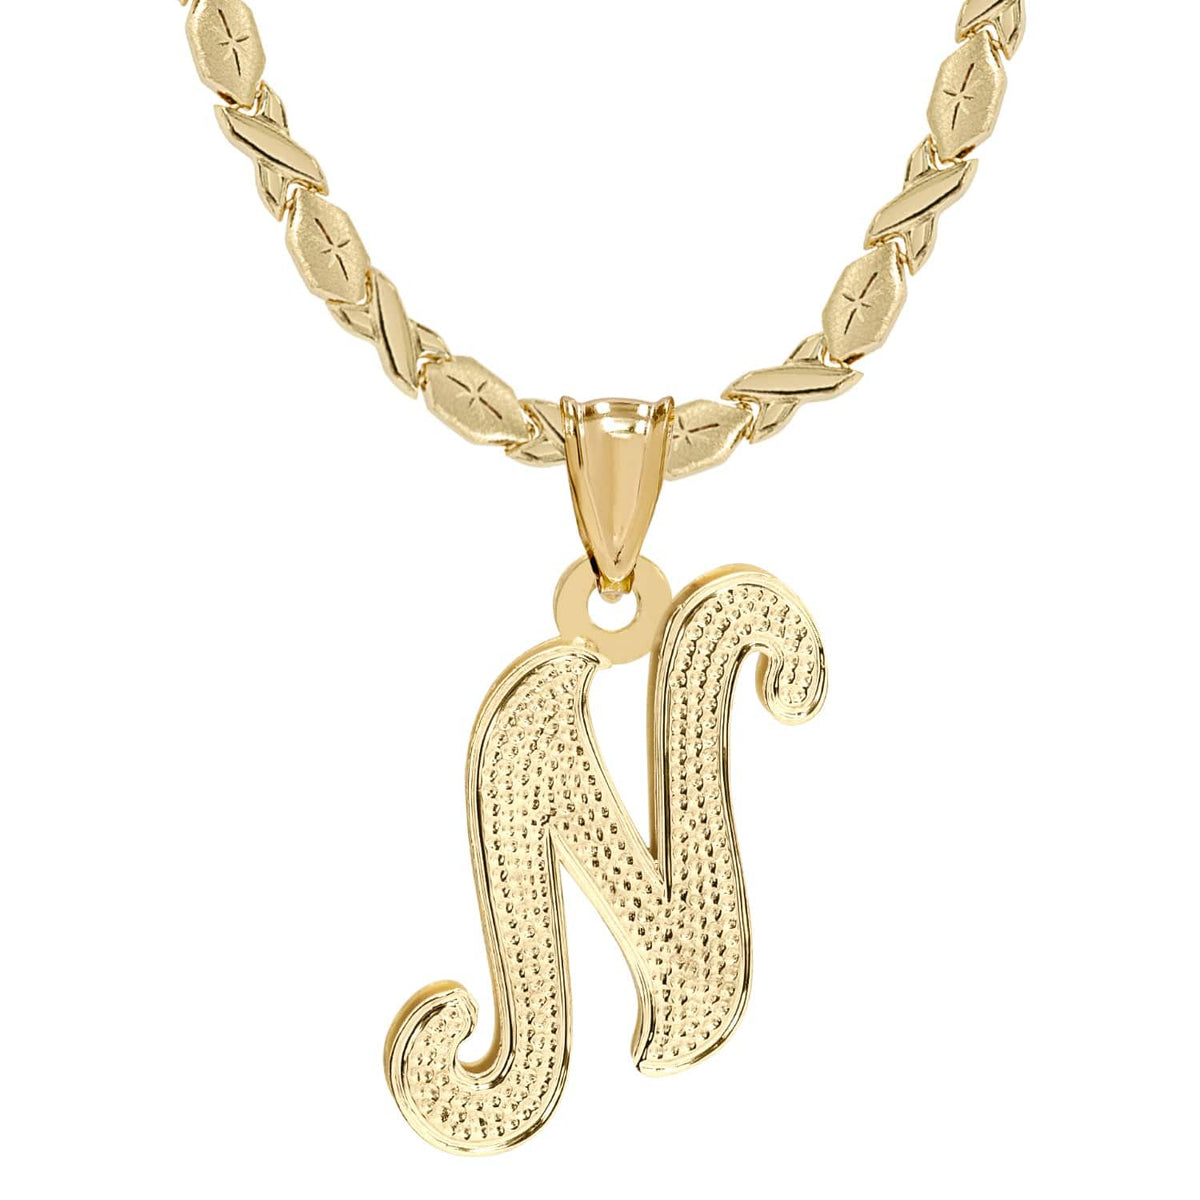 14K Gold over Sterling Silver / Xoxo Chain Initial Necklace - Double Plated with Beaded Finish